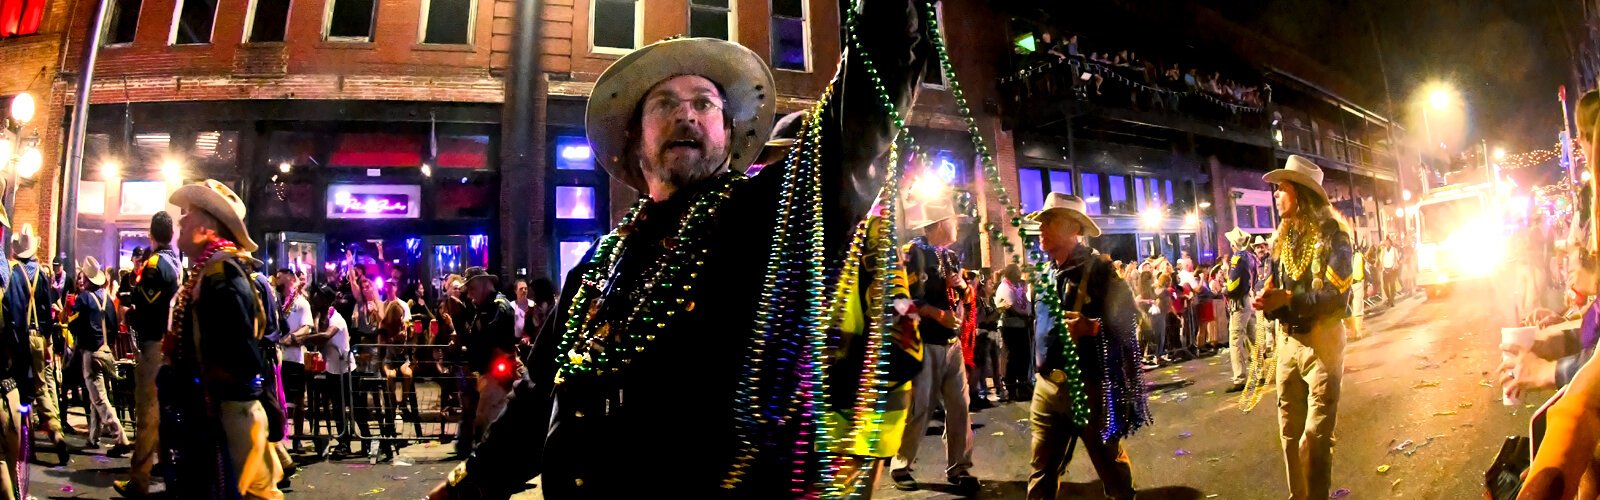 A member of the Rough Riders Krewe tosses beads to the crowd packed along Seventh Avenue in Ybor City for the Knight Parade.